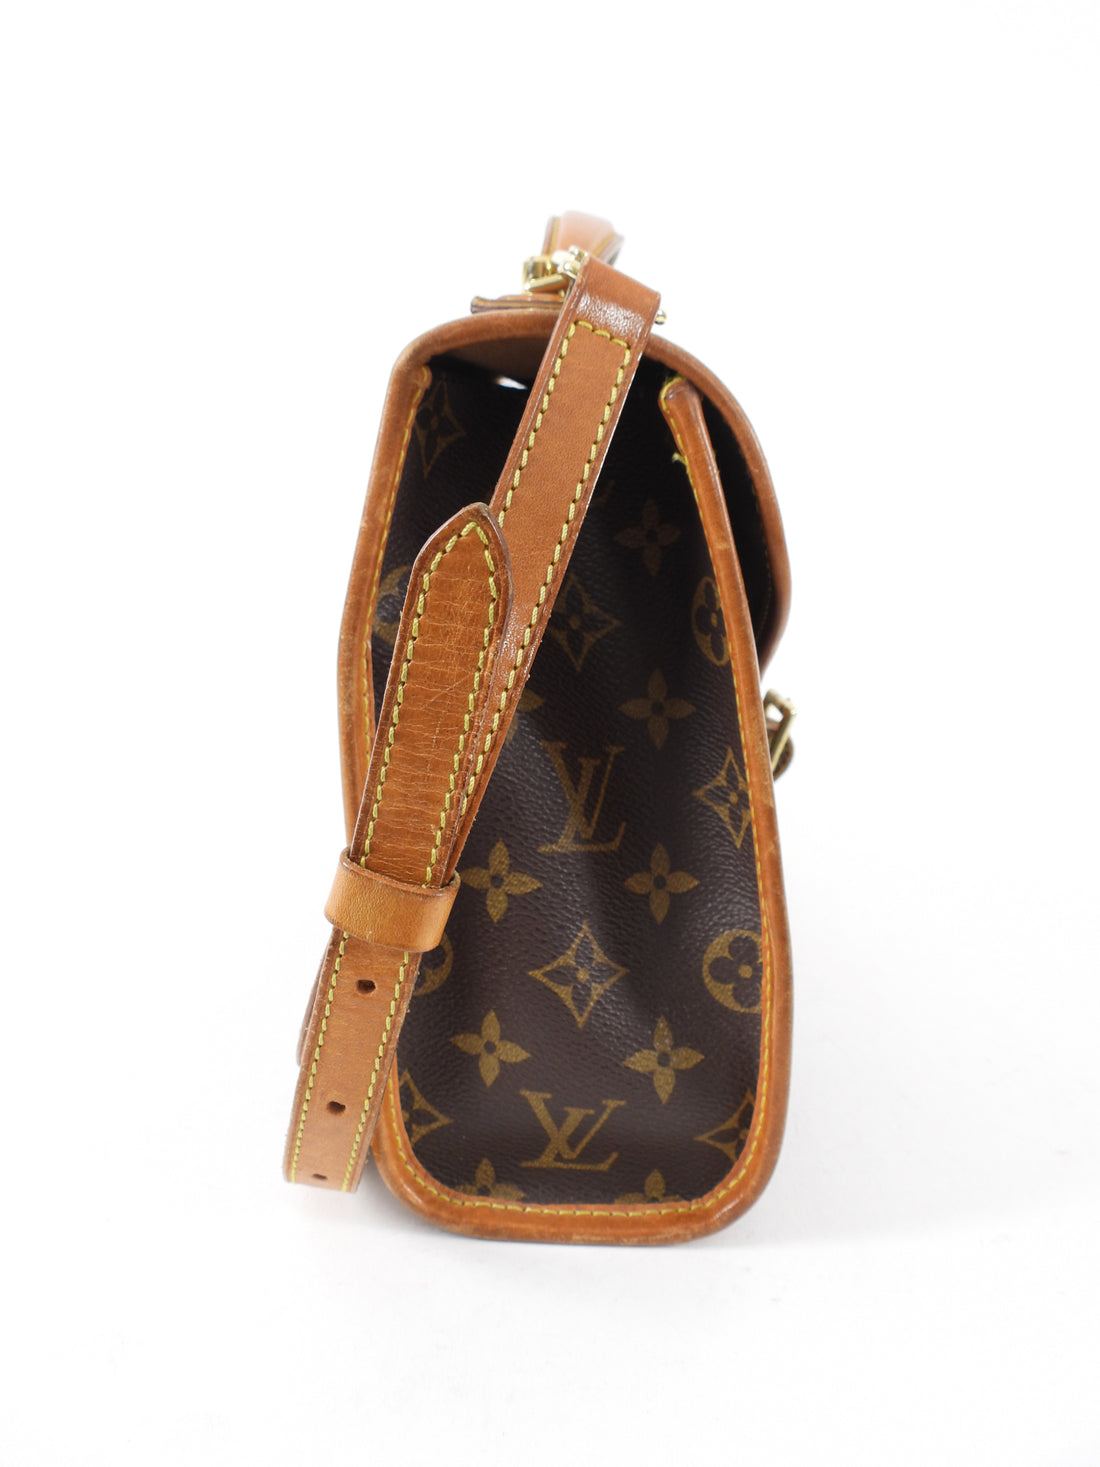 ✨WE'RE OPEN TO BUY & SELL✨ . ♻️ Gently Used Louis Vuitton